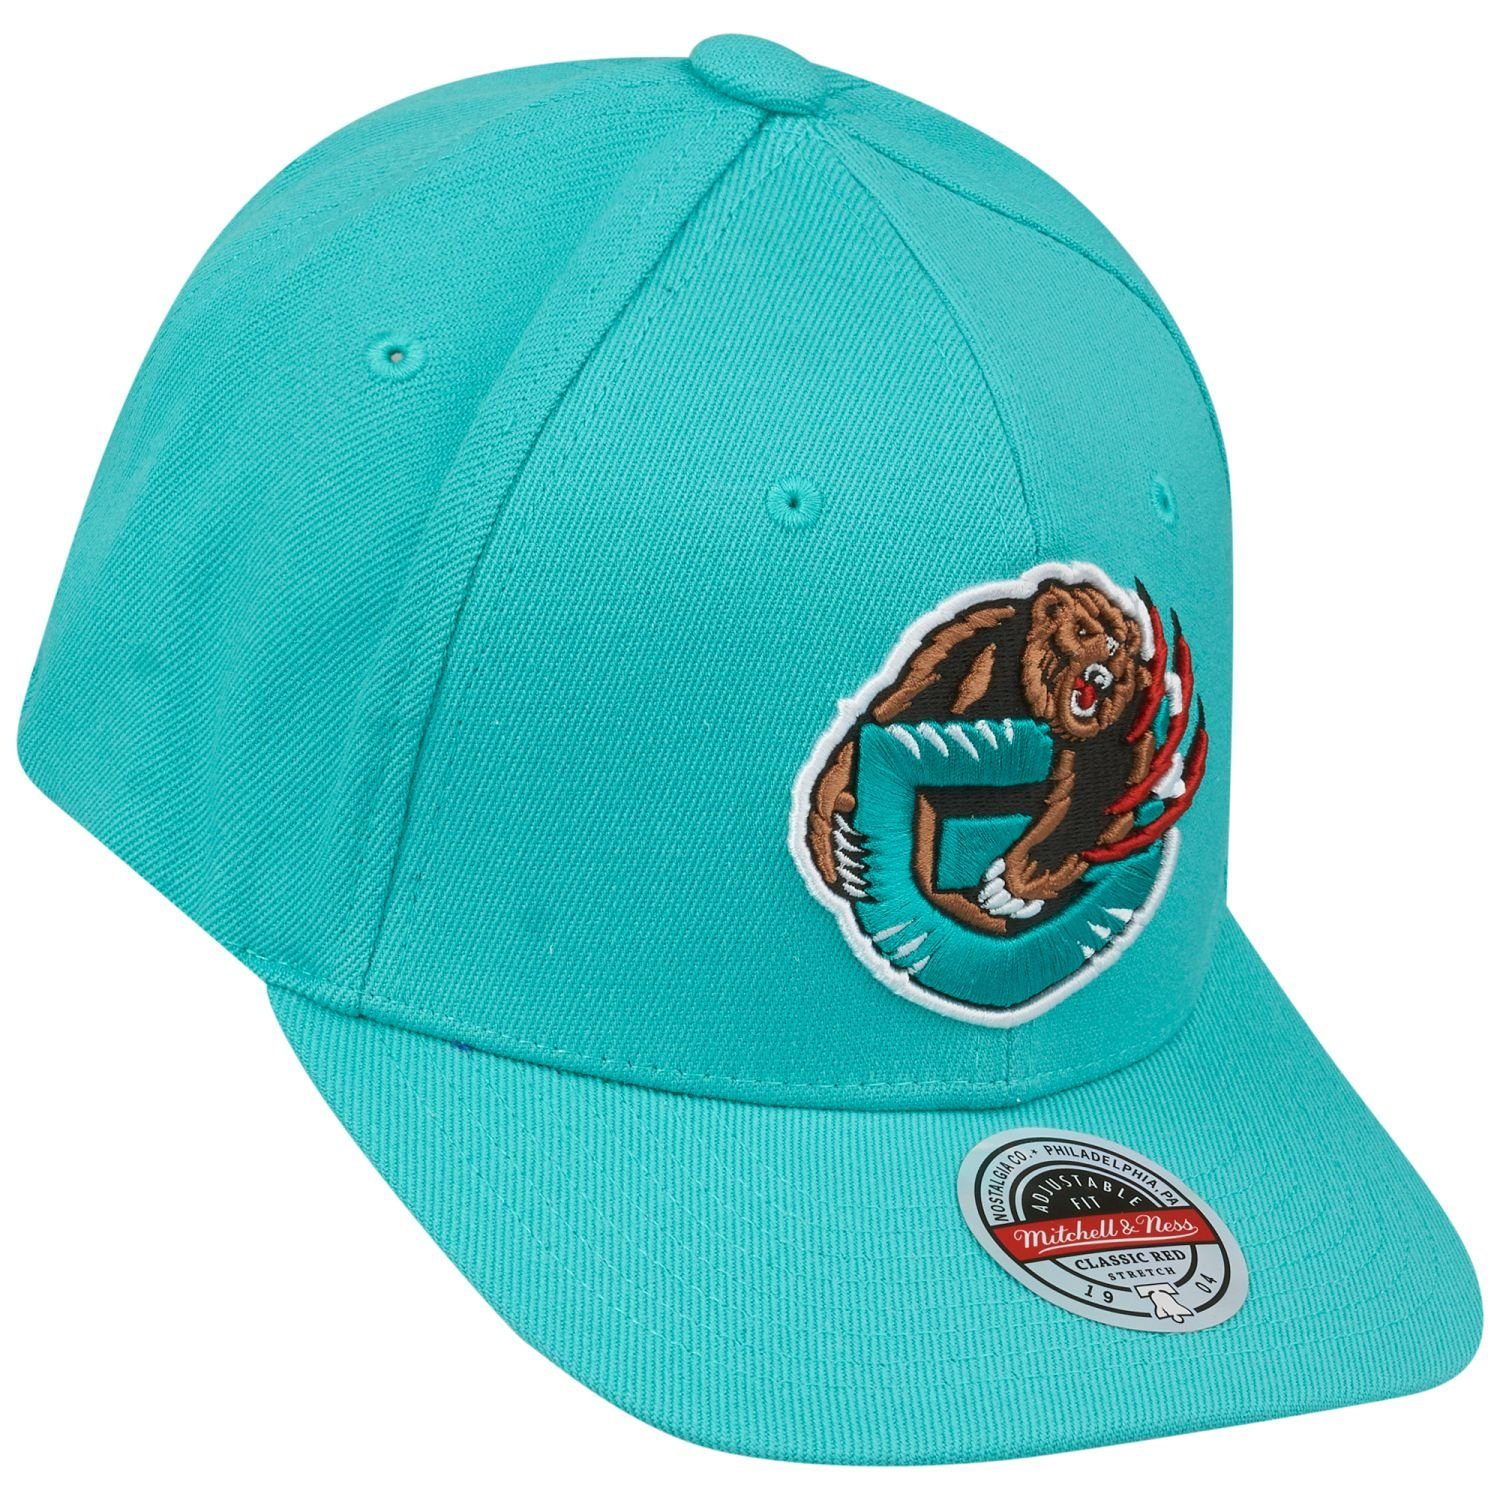 Snapback Cap HWC Ness & Mitchell Stretch Vancouver Grizzlies